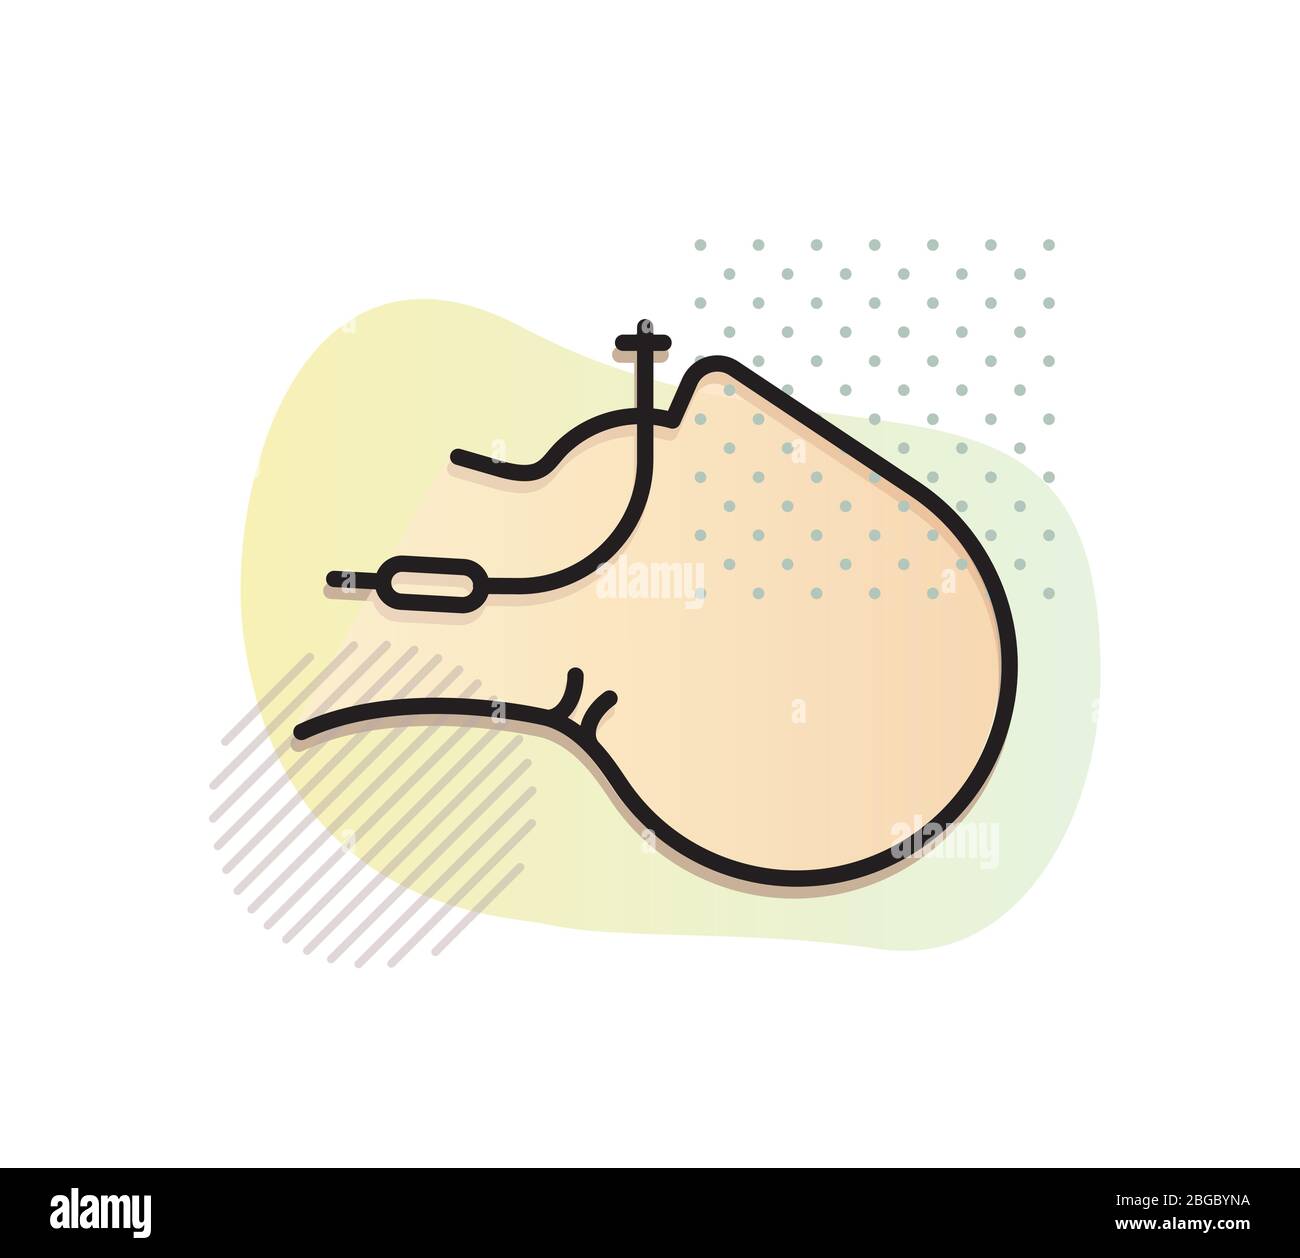 Ventilation Support - Tracheal Intubation - Icon as EPS 10 File Stock Vector